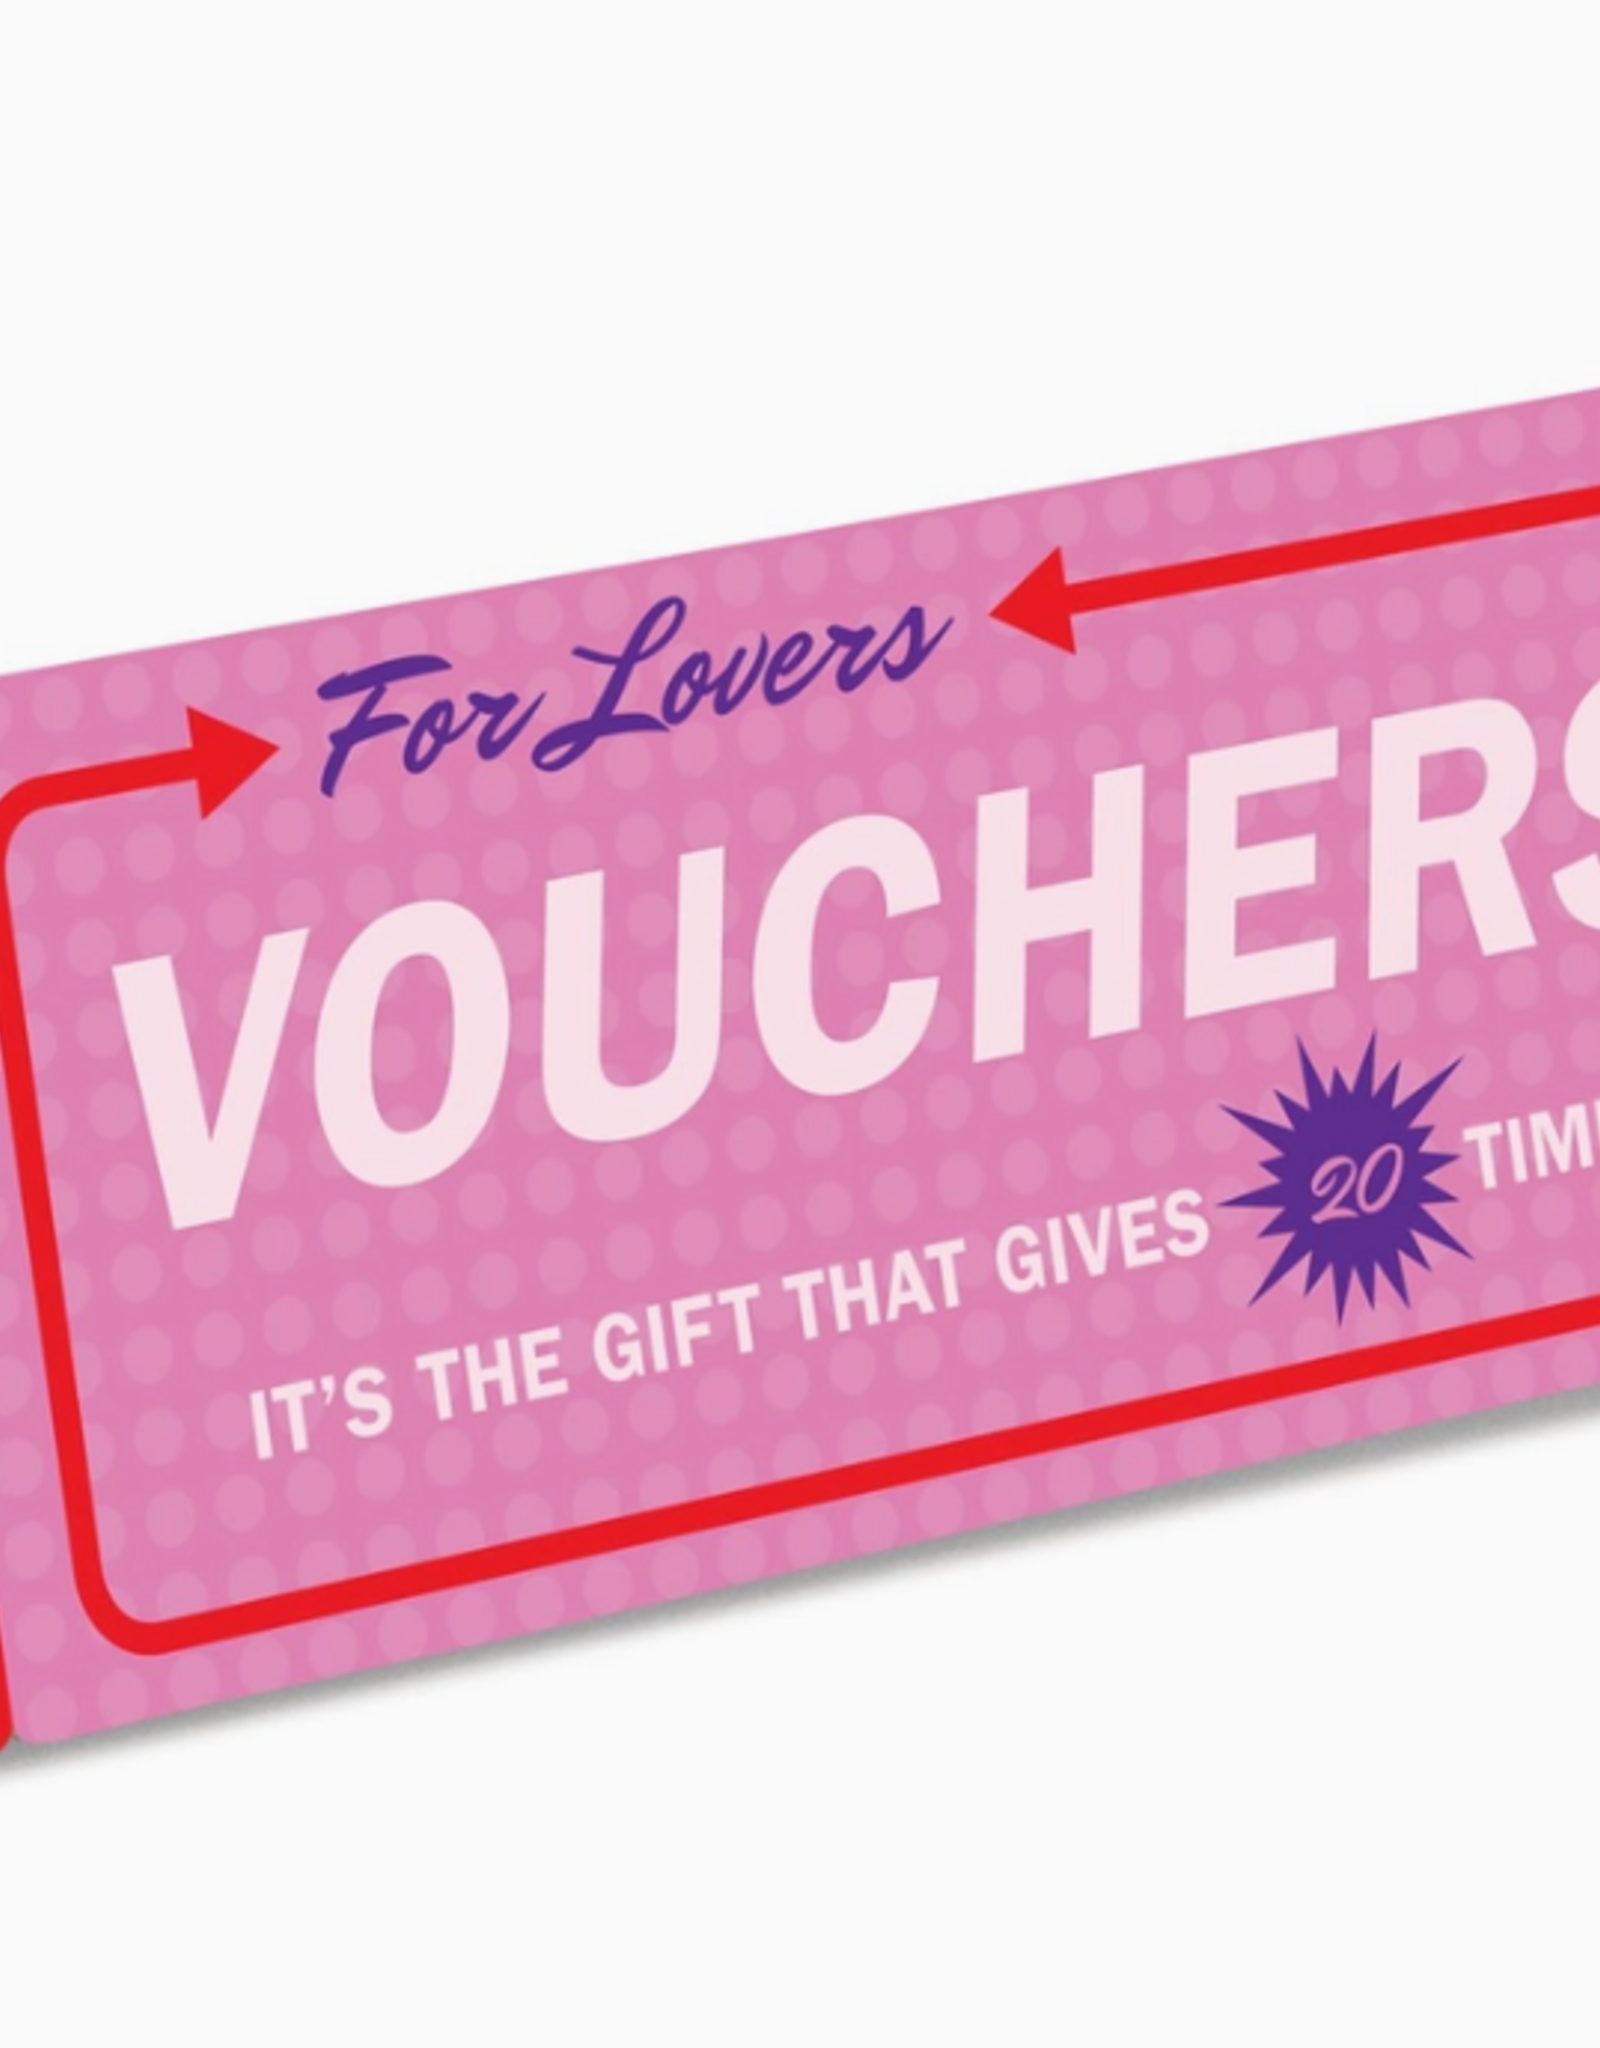 Knock Knock Vouchers for Lovers - Fill In the Blank